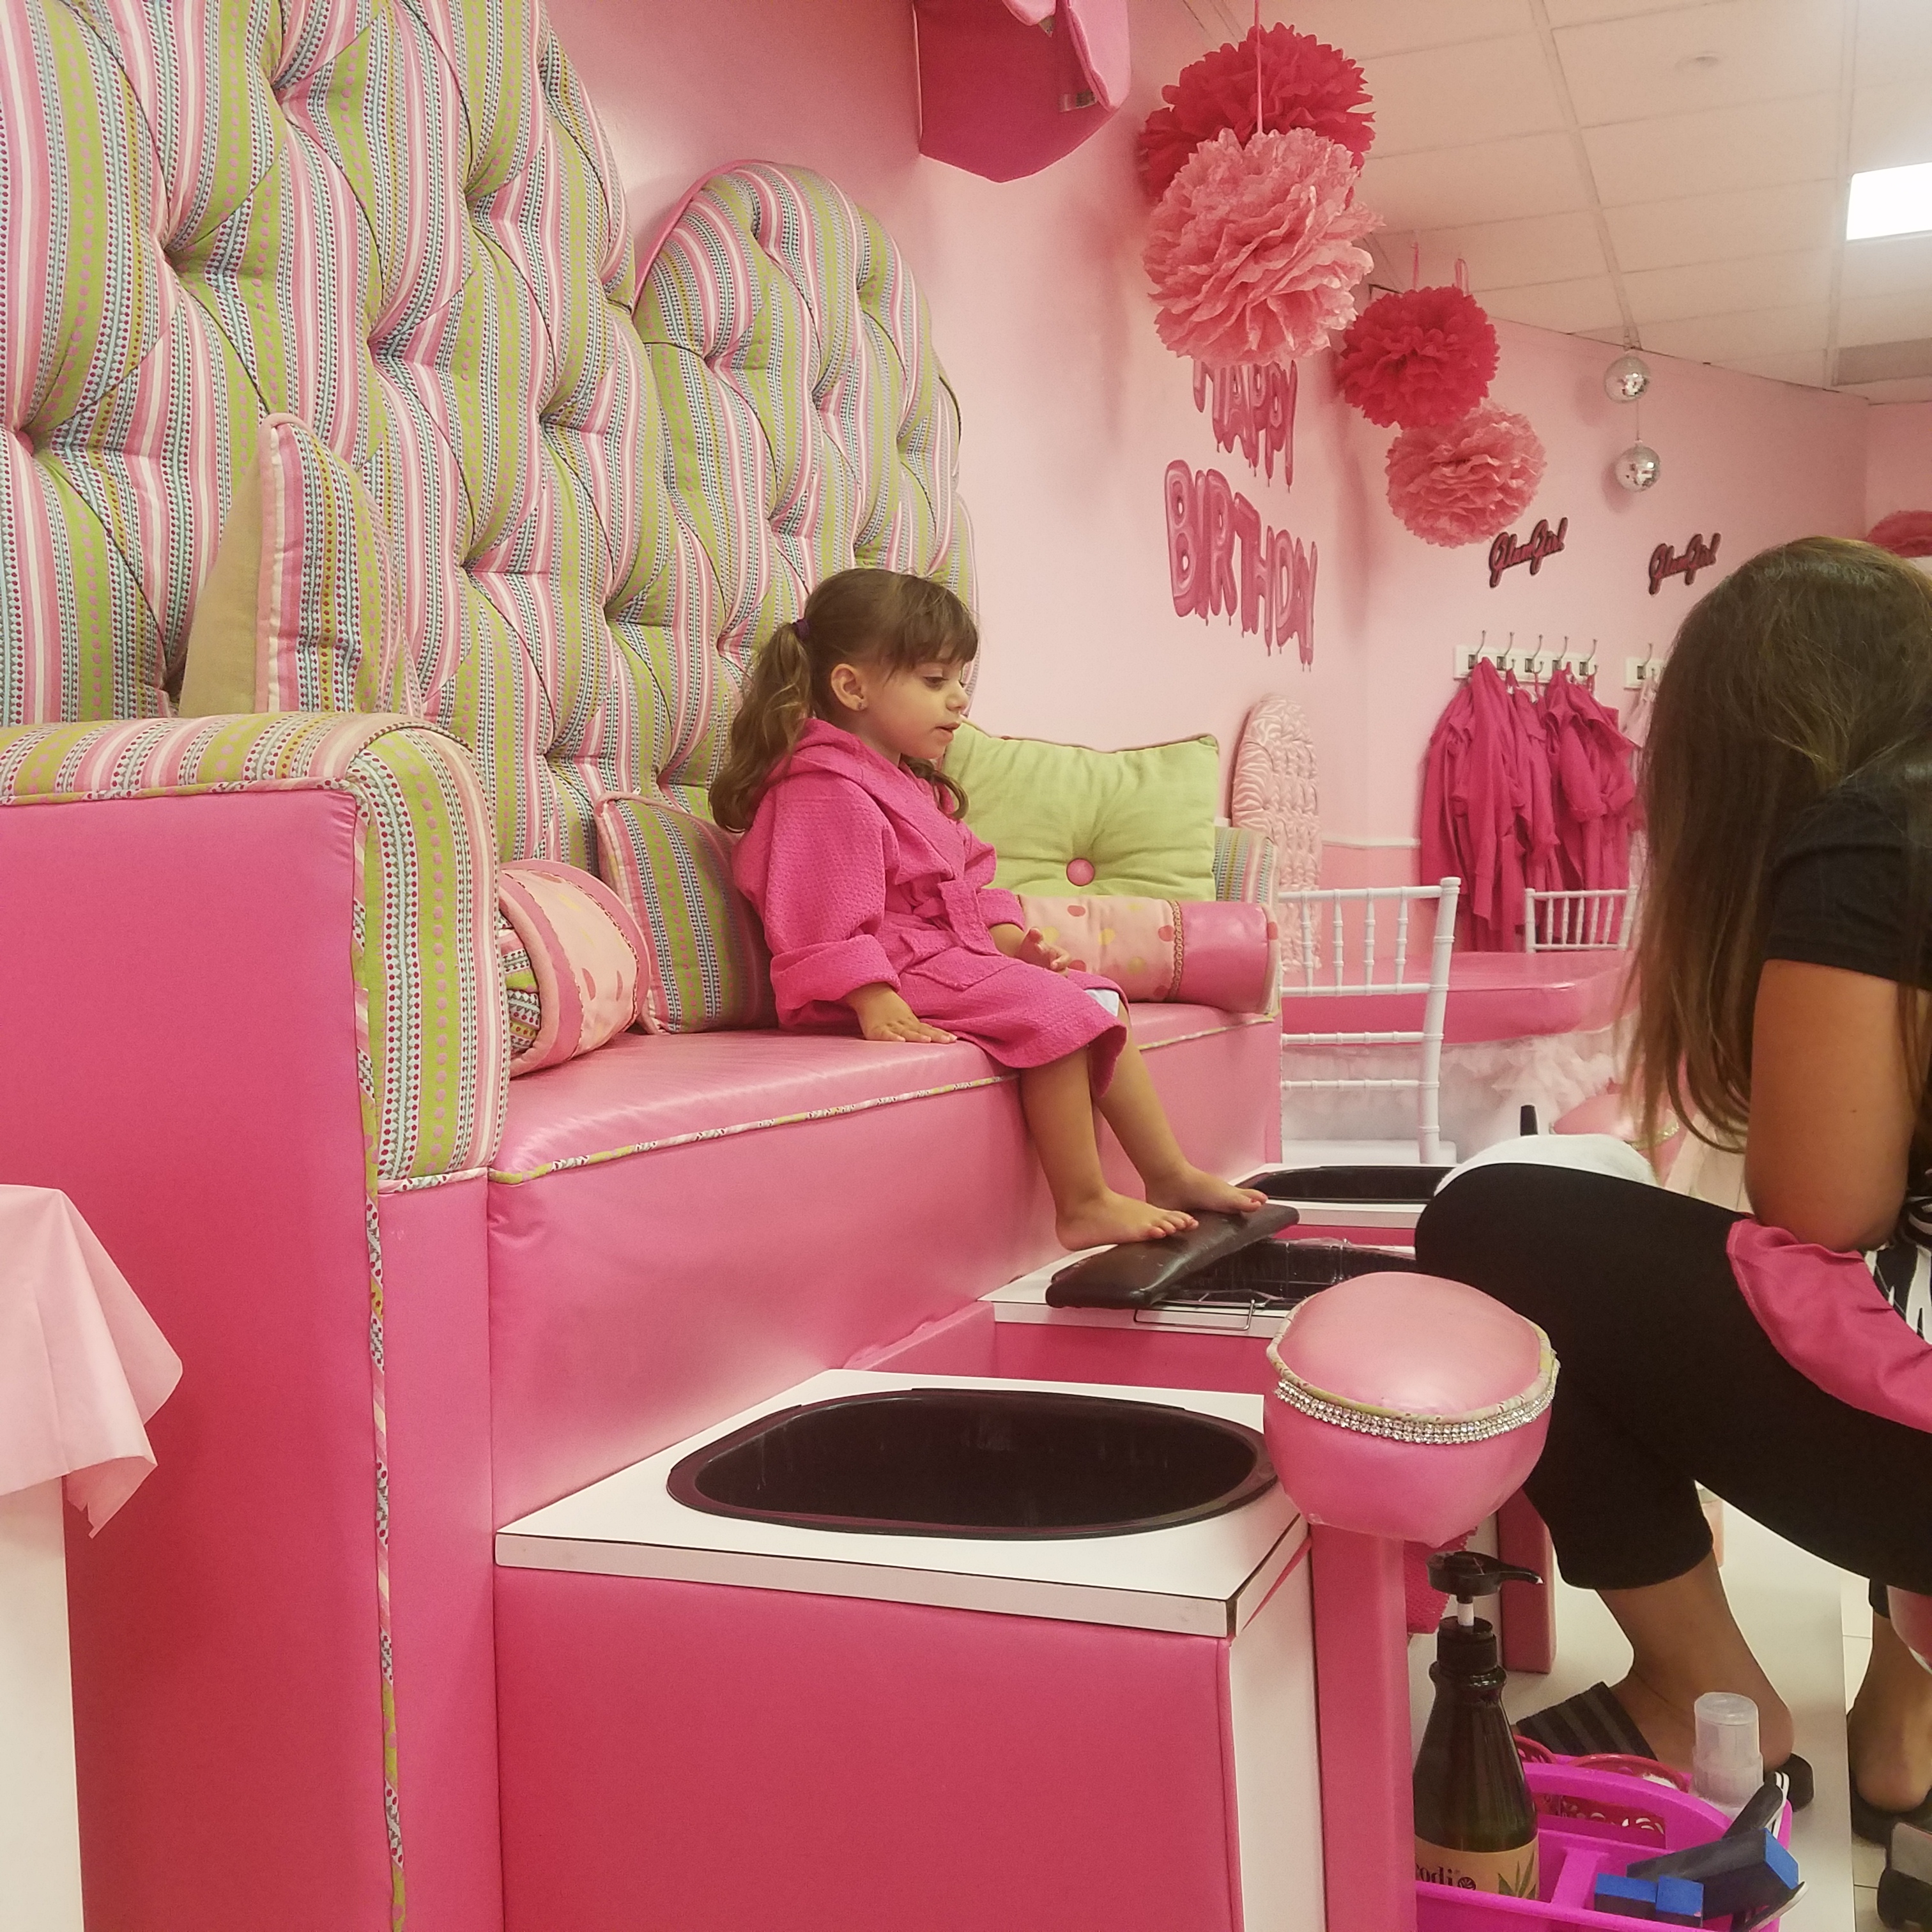 Nail Salons in Chicago for Manicures, Pedicures and Nail Art